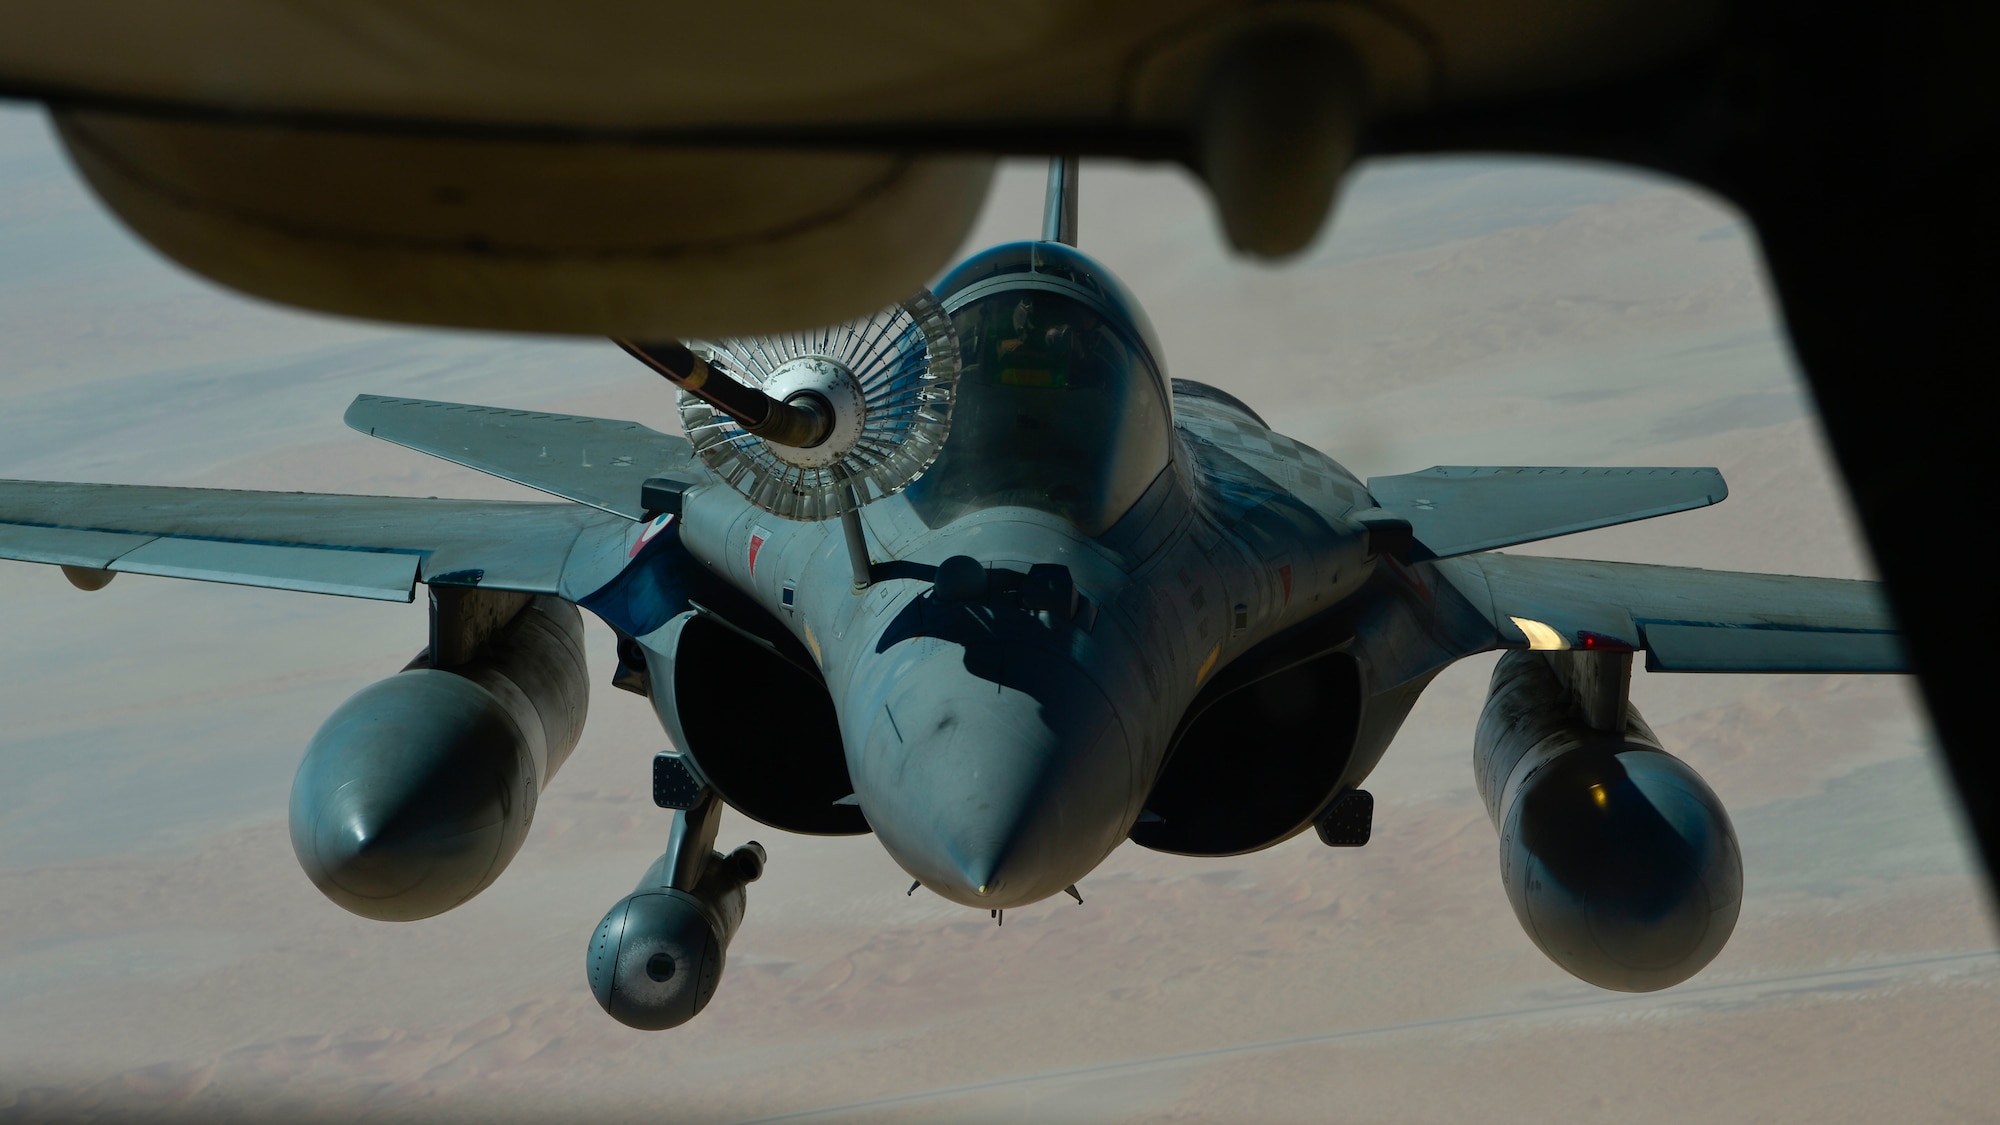 A French Air Force Dassault Rafale receives fuel from a U.S. Air Force KC-10 Extender assigned to the 908th Expeditionary Air Refueling Squadron out of Al Dhafra Air Base, United Arab Emirates, Aug. 28, 2019. Assets under U.S. Air Forces Central Command maintain a constant partnership with regional air forces to augment and perfect capabilities while striving for operational harmony. (U.S. Air Force photo by Staff Sgt. Chris Drzazgowski)